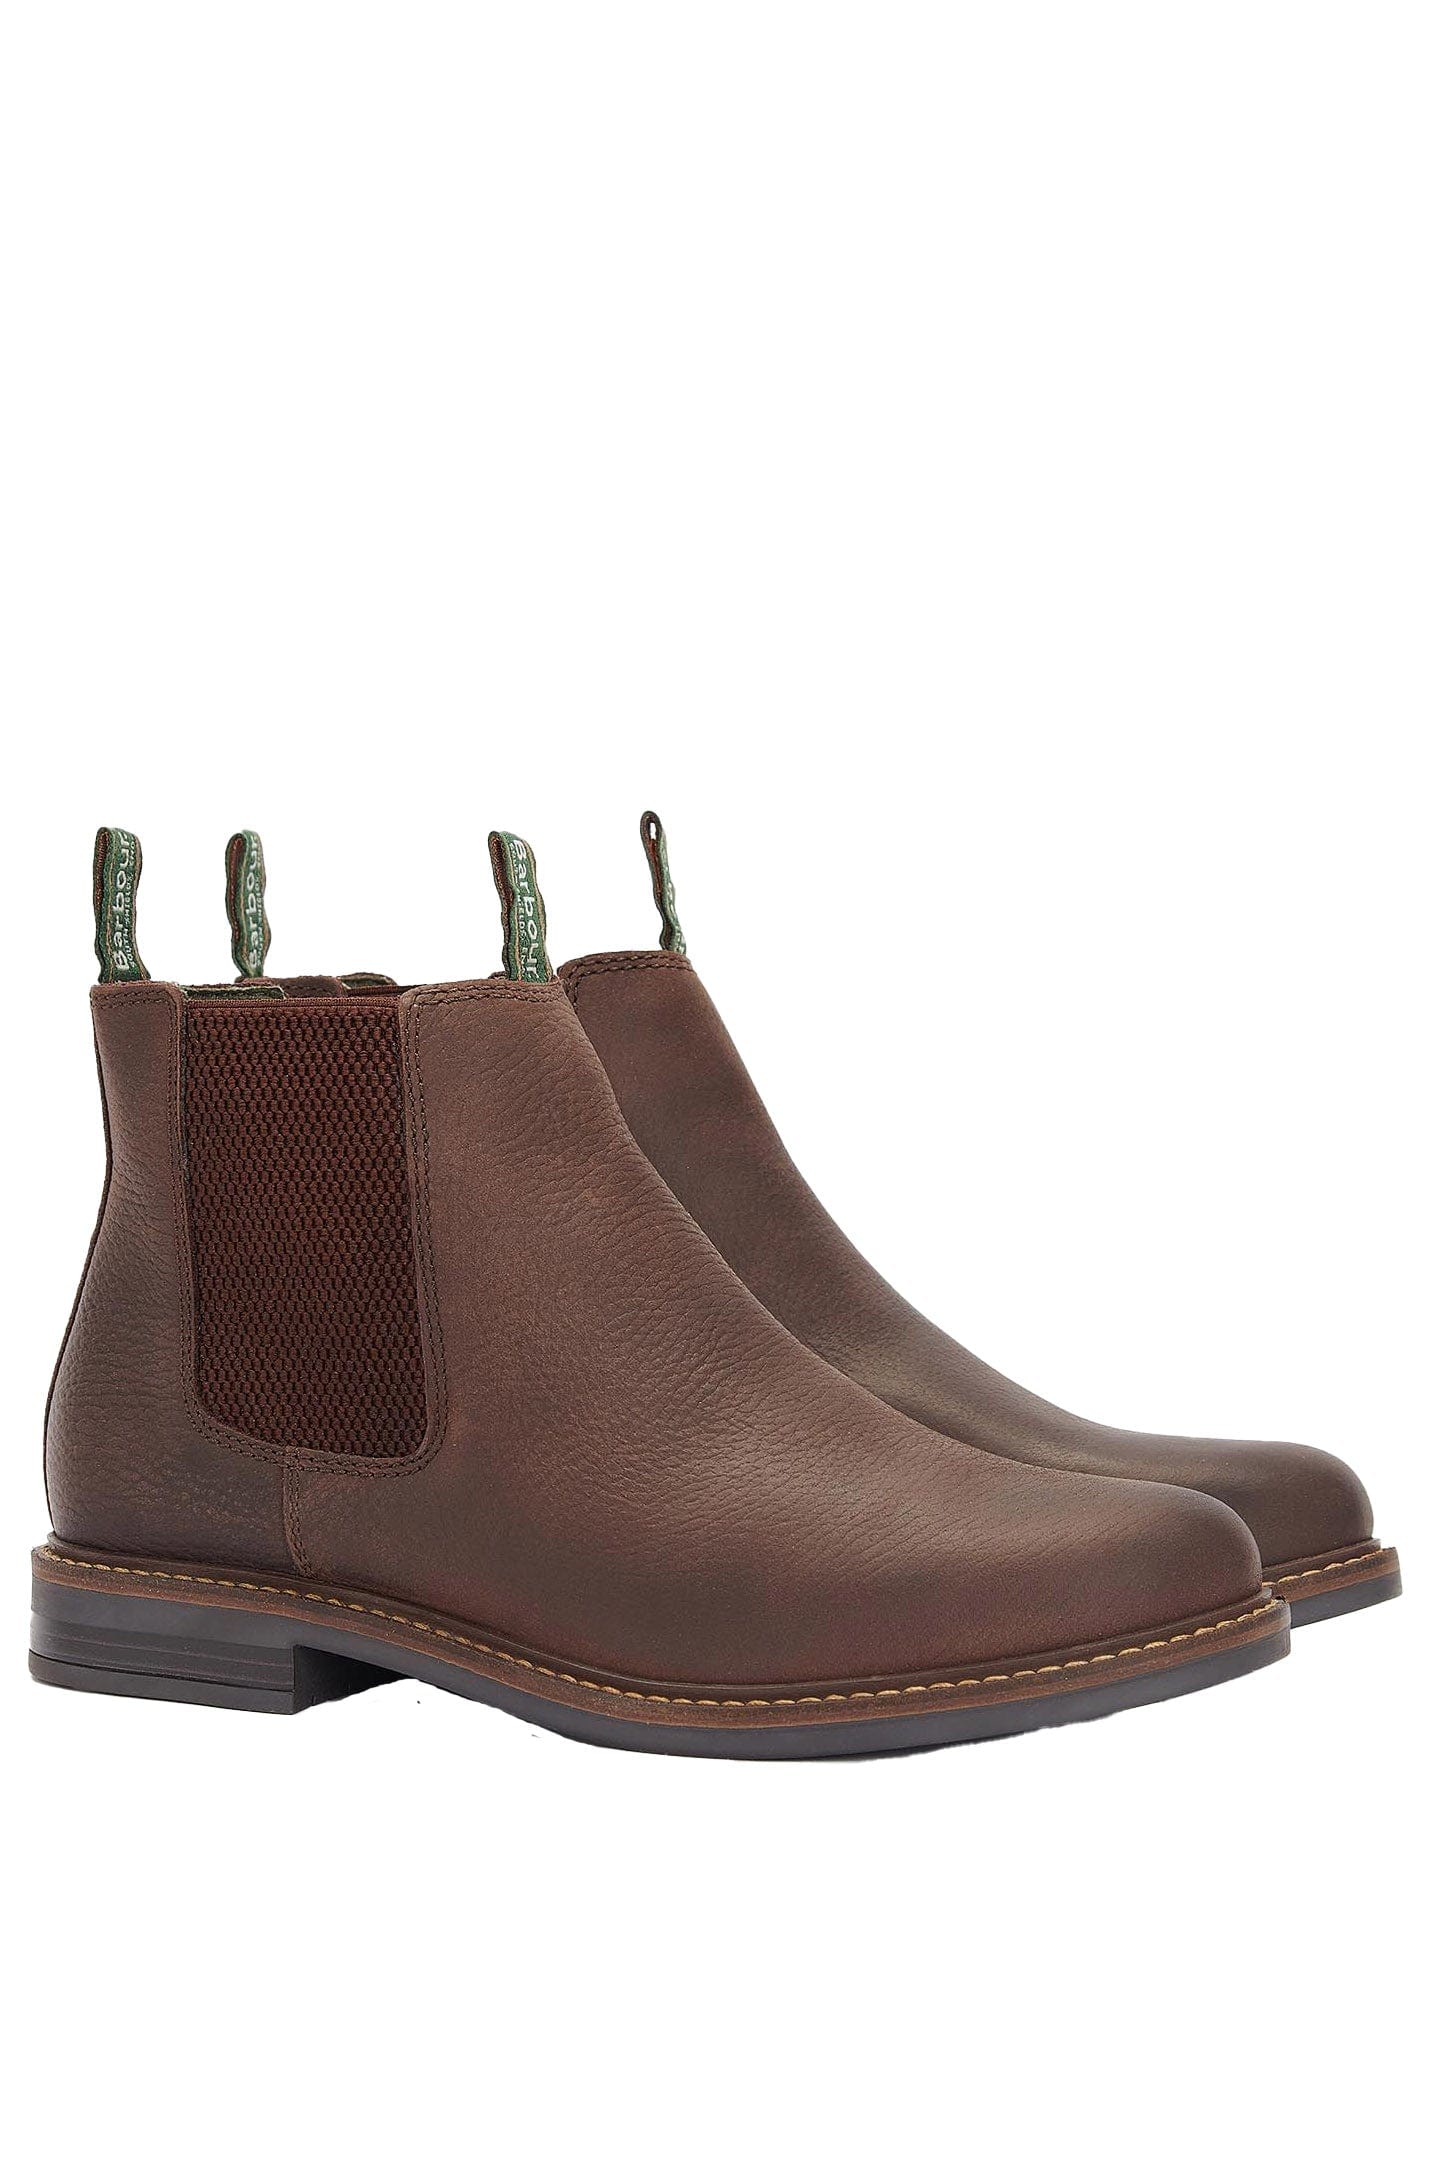 Barbour Farsley Chelsea Boots - Mocha – Potters of Buxton